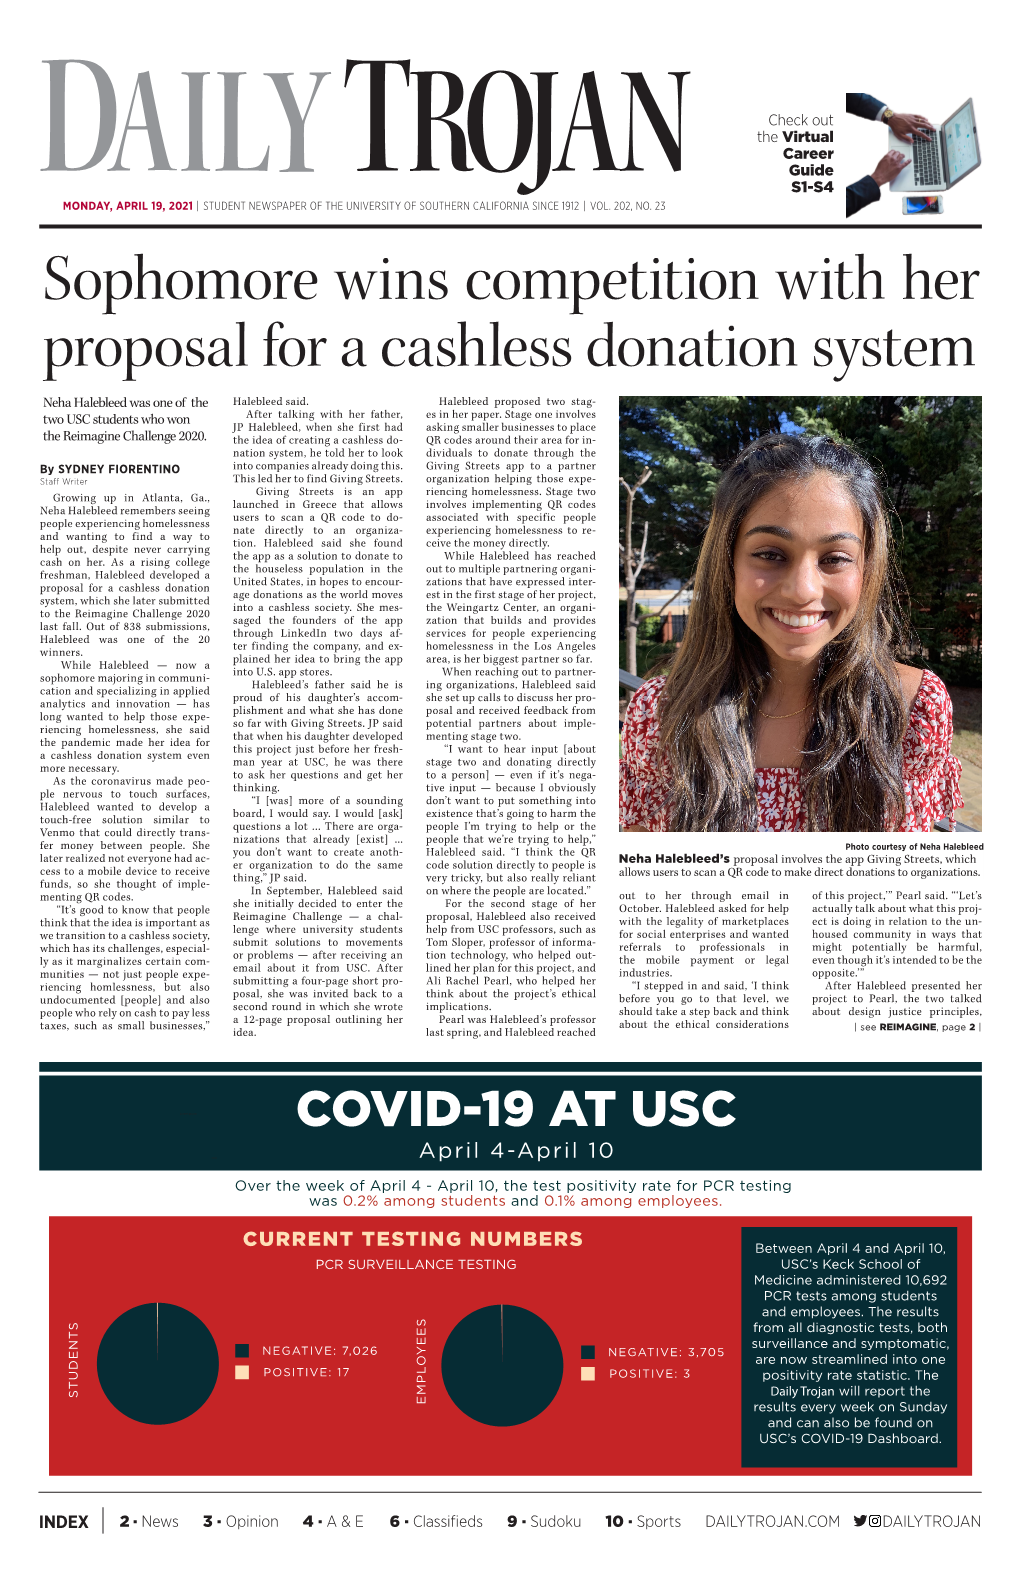 Sophomore Wins Competition with Her Proposal for a Cashless Donation System